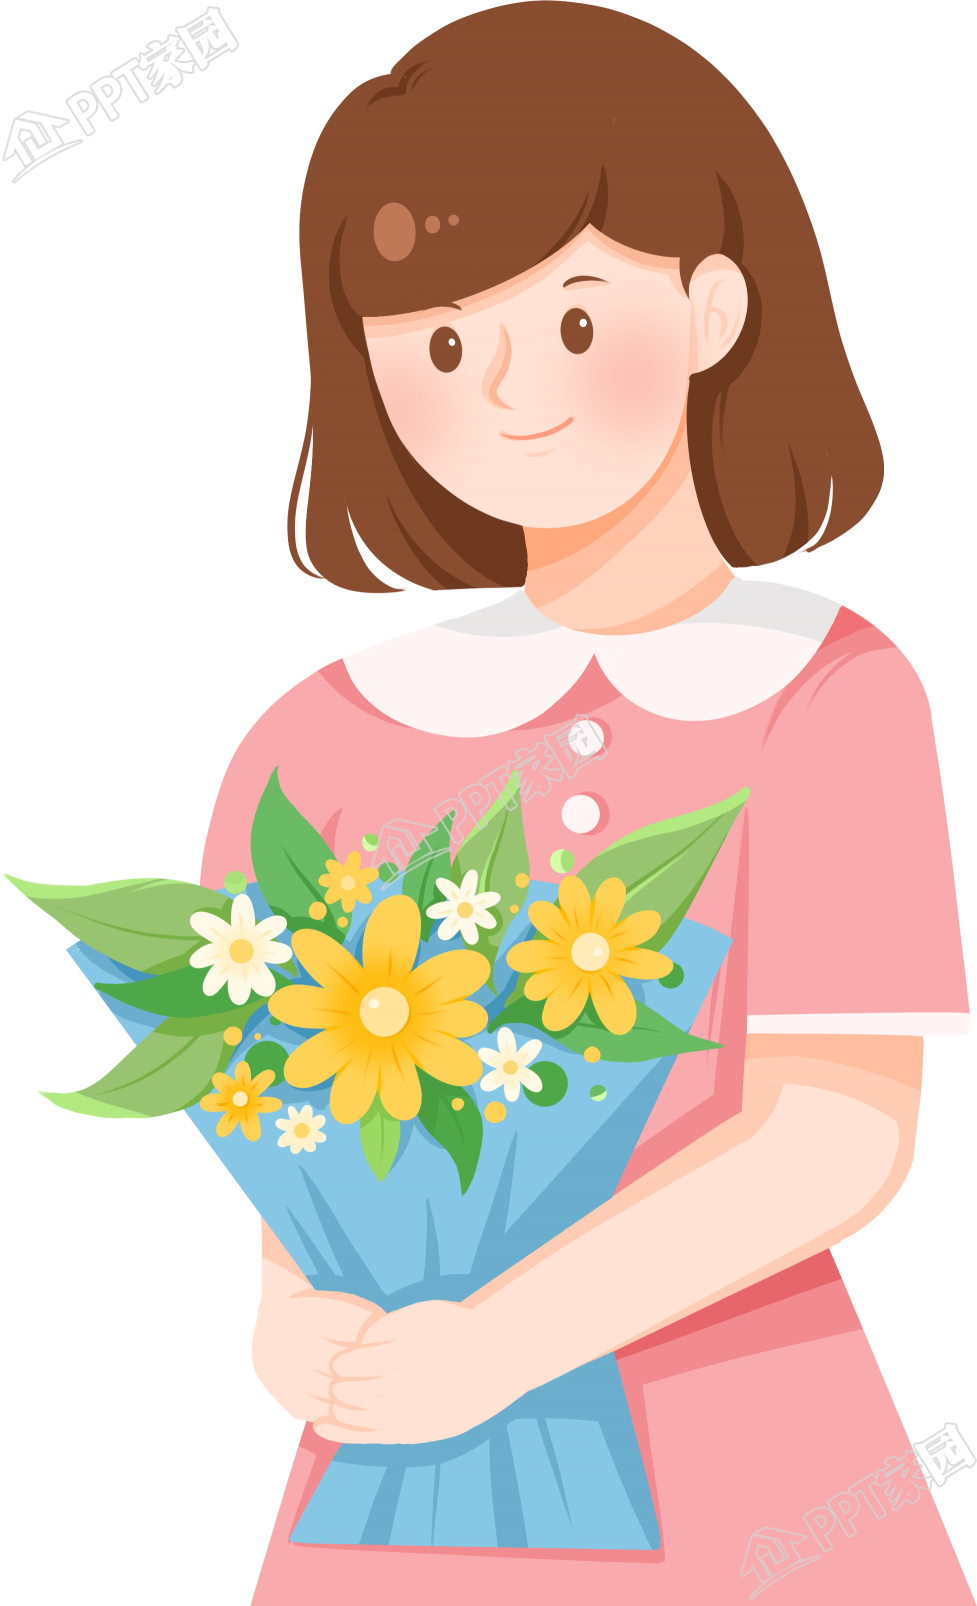 Hand-painted flowers for girls festival picture material download recommended